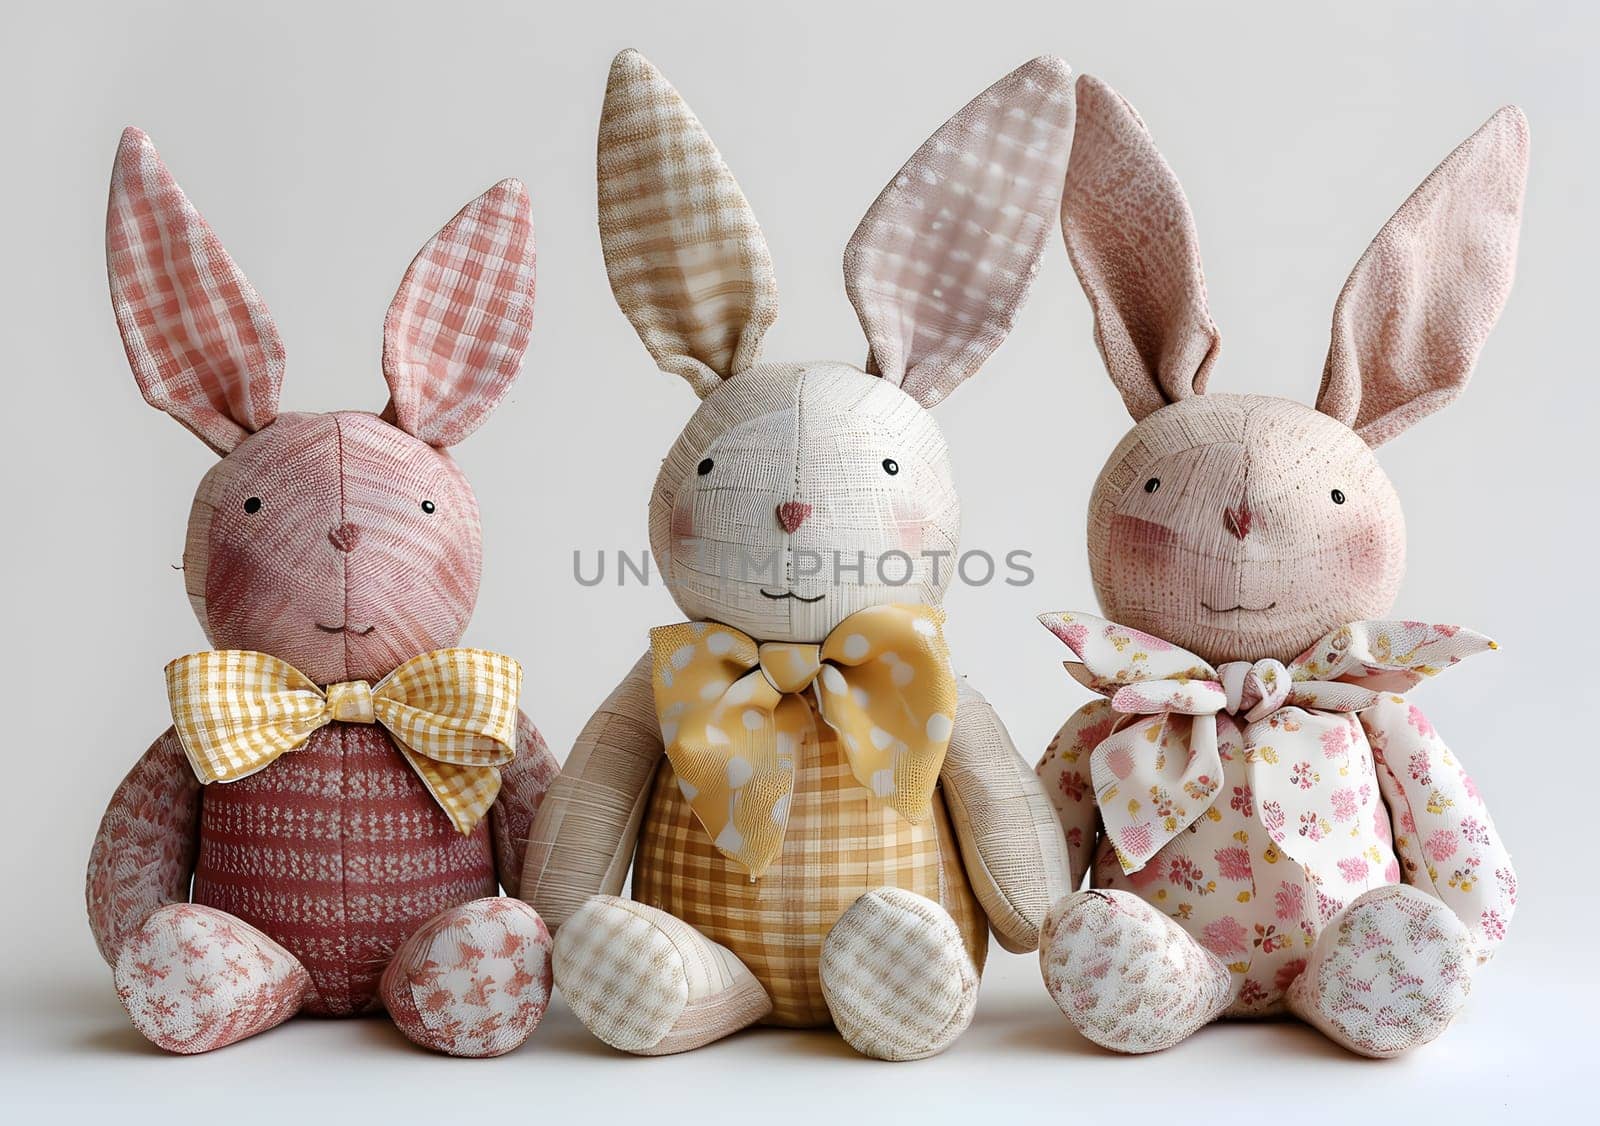 Three white stuffed bunny rabbits with pink ears are sitting next to each other in a photo. The fluffy toys have a fawn pattern on their bodies, resembling real rabbits and hares